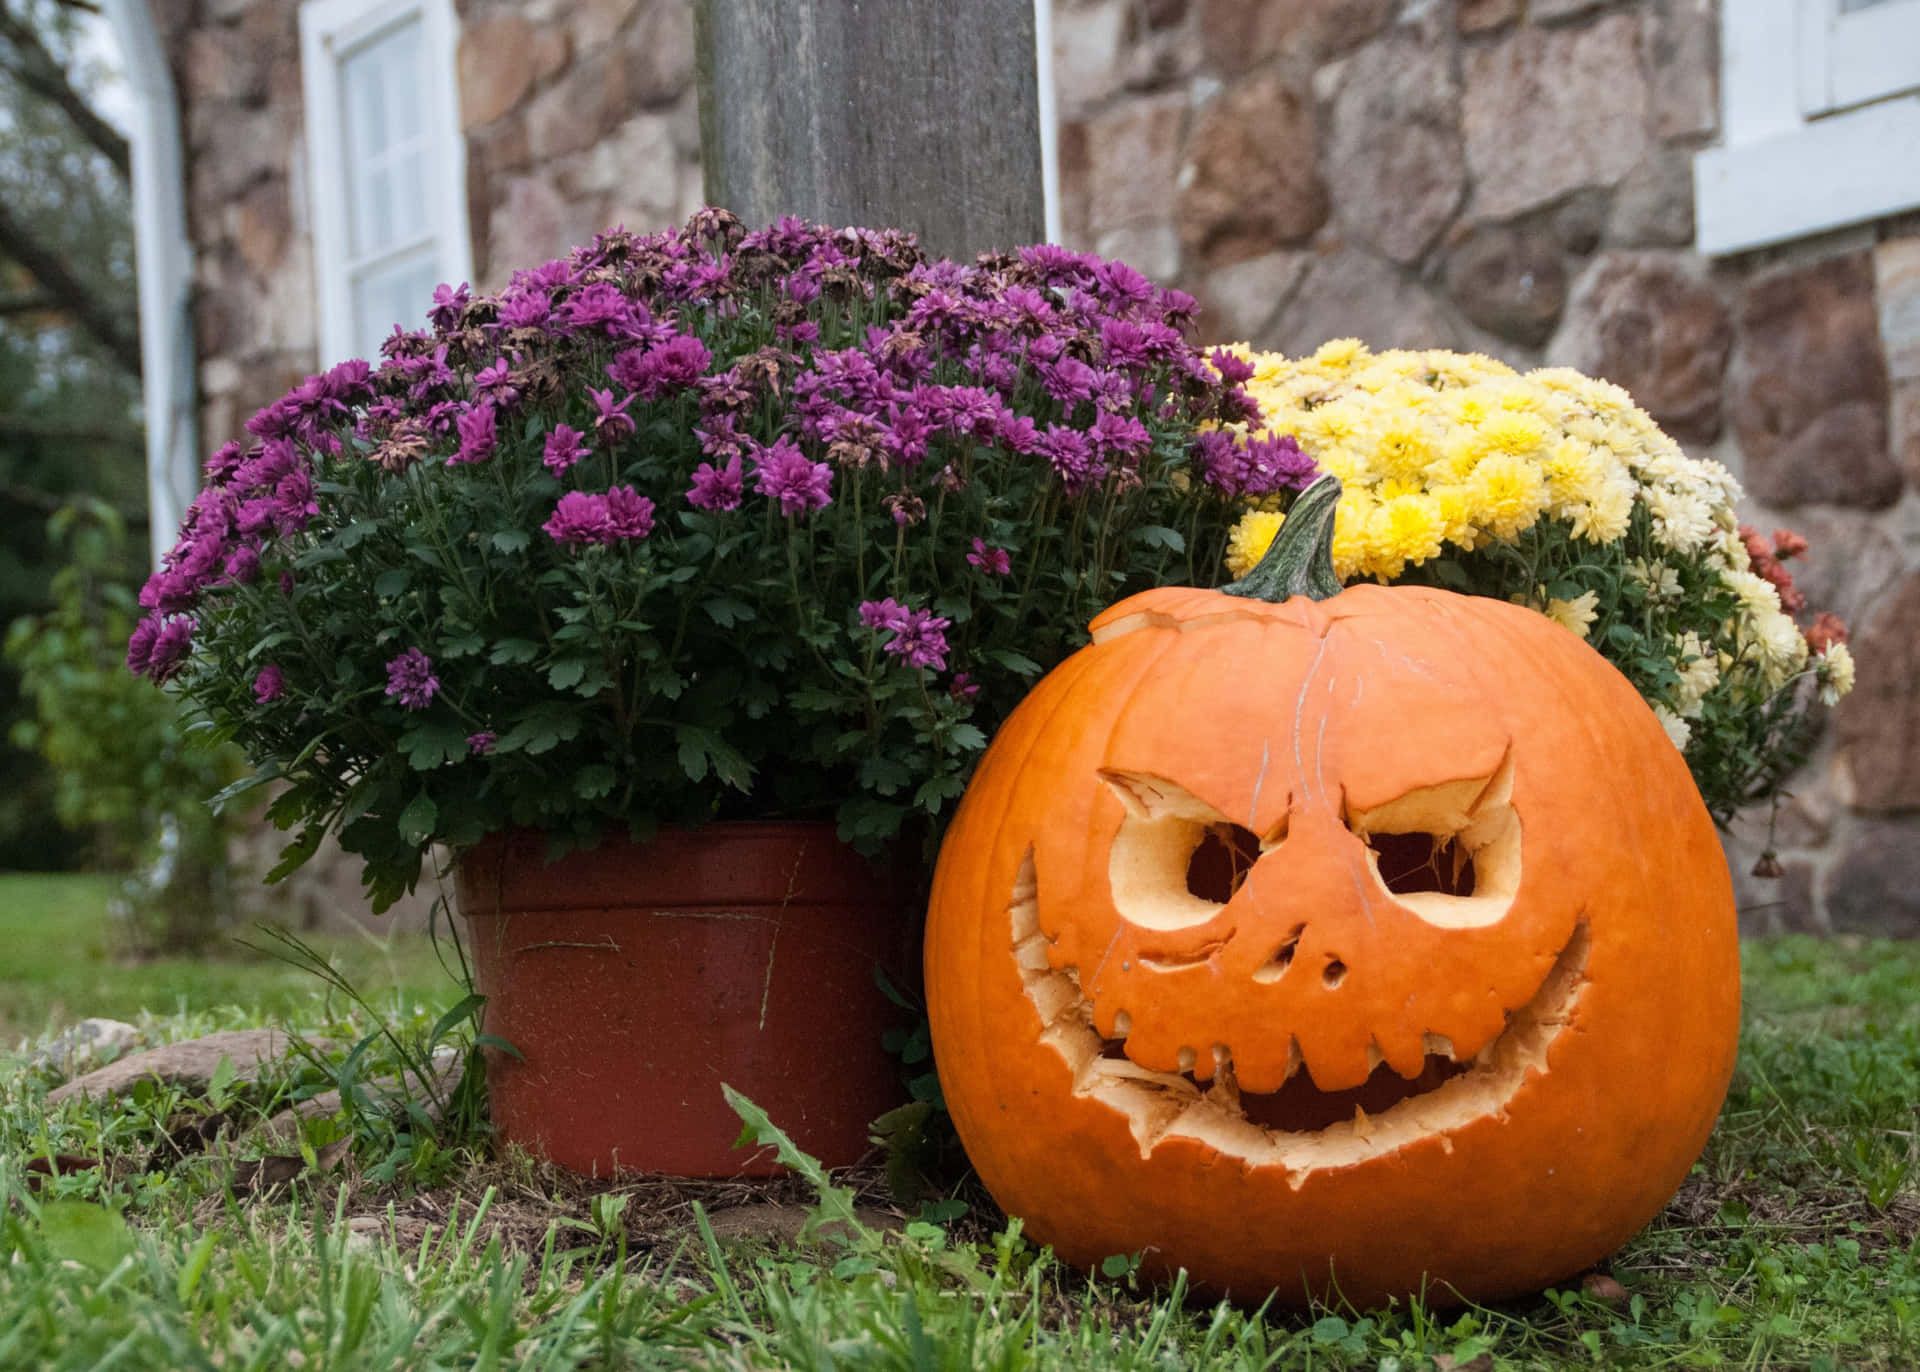 Download Pumpkin Carving With Purple And Yellow Flowers Pictures ...